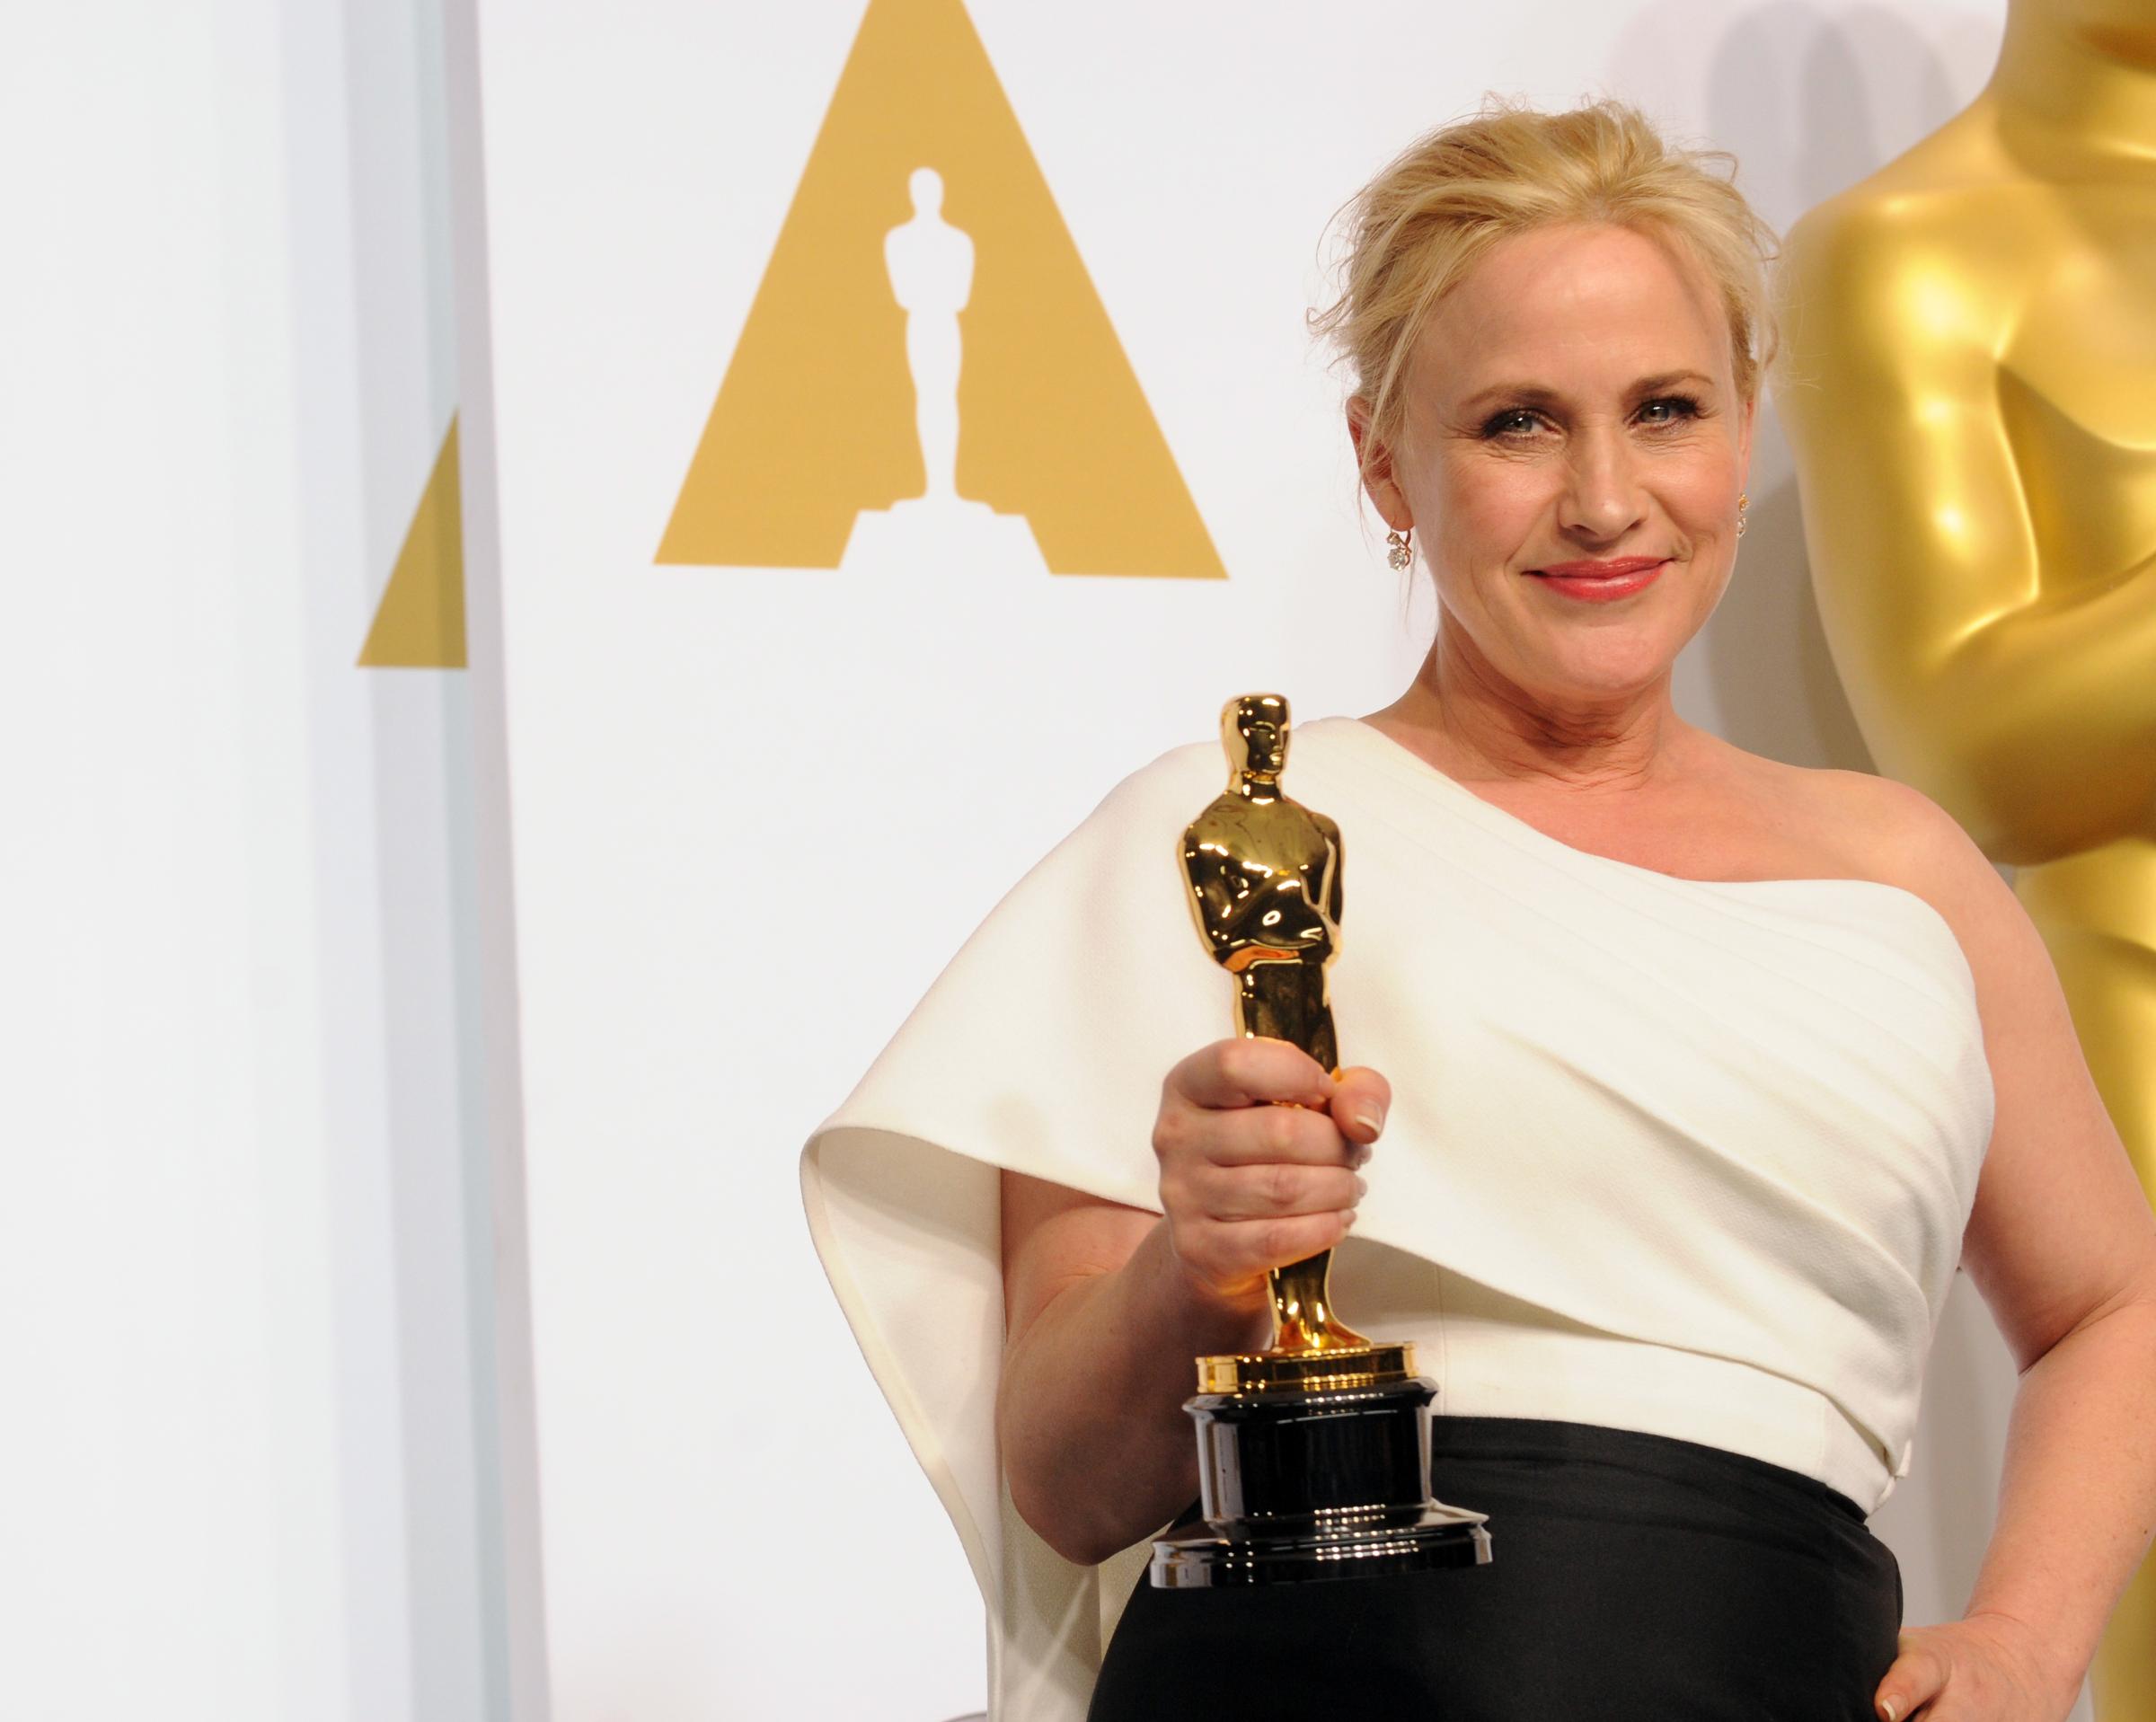 Actress Patricia Arquette winner for Best Supporting Actress in "Boyhood" poses inside the press room of the 87th Annual Academy Awards held at Loews Hollywood Hotel on February 22, 2015 in Hollywood, California.